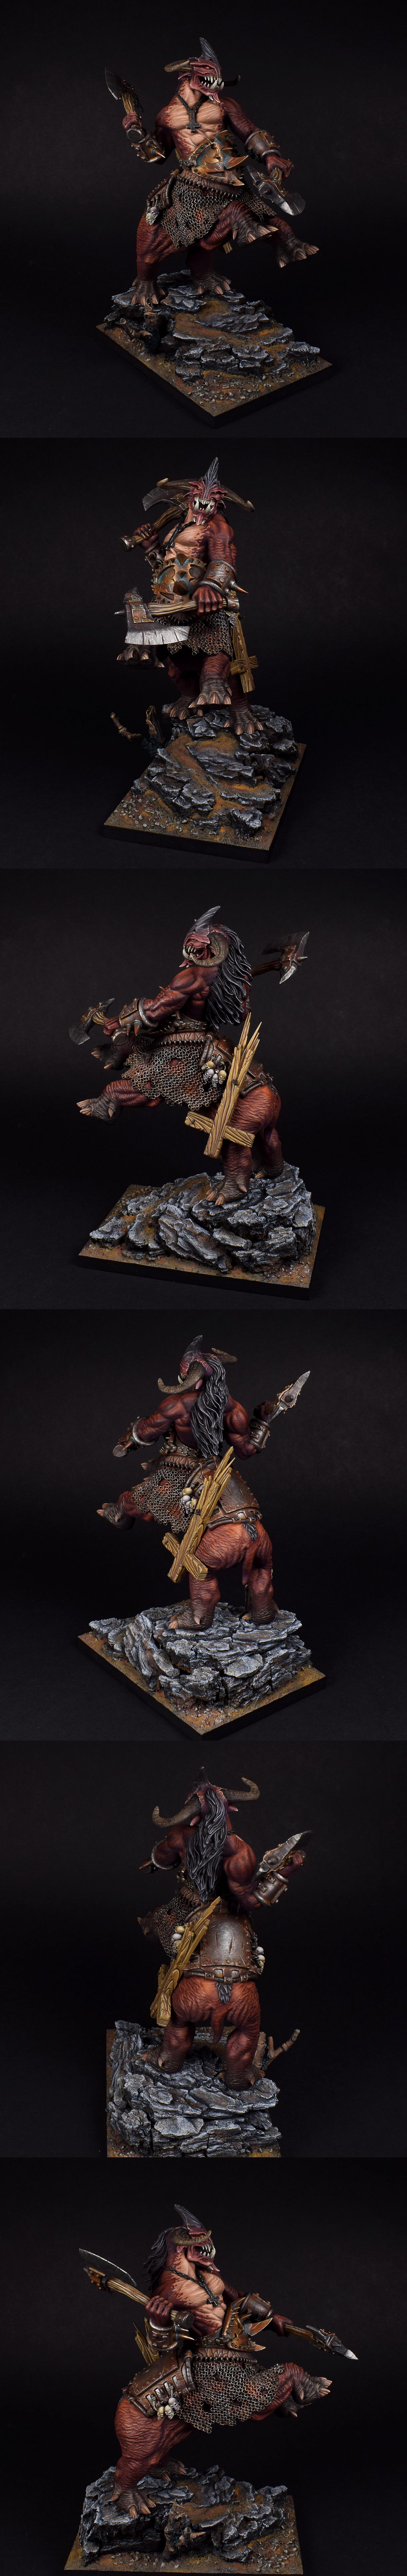 Dis, Fiend, Hellion, Infernii, Mierce Miniatures, Servile, Tegroth, Two Axe